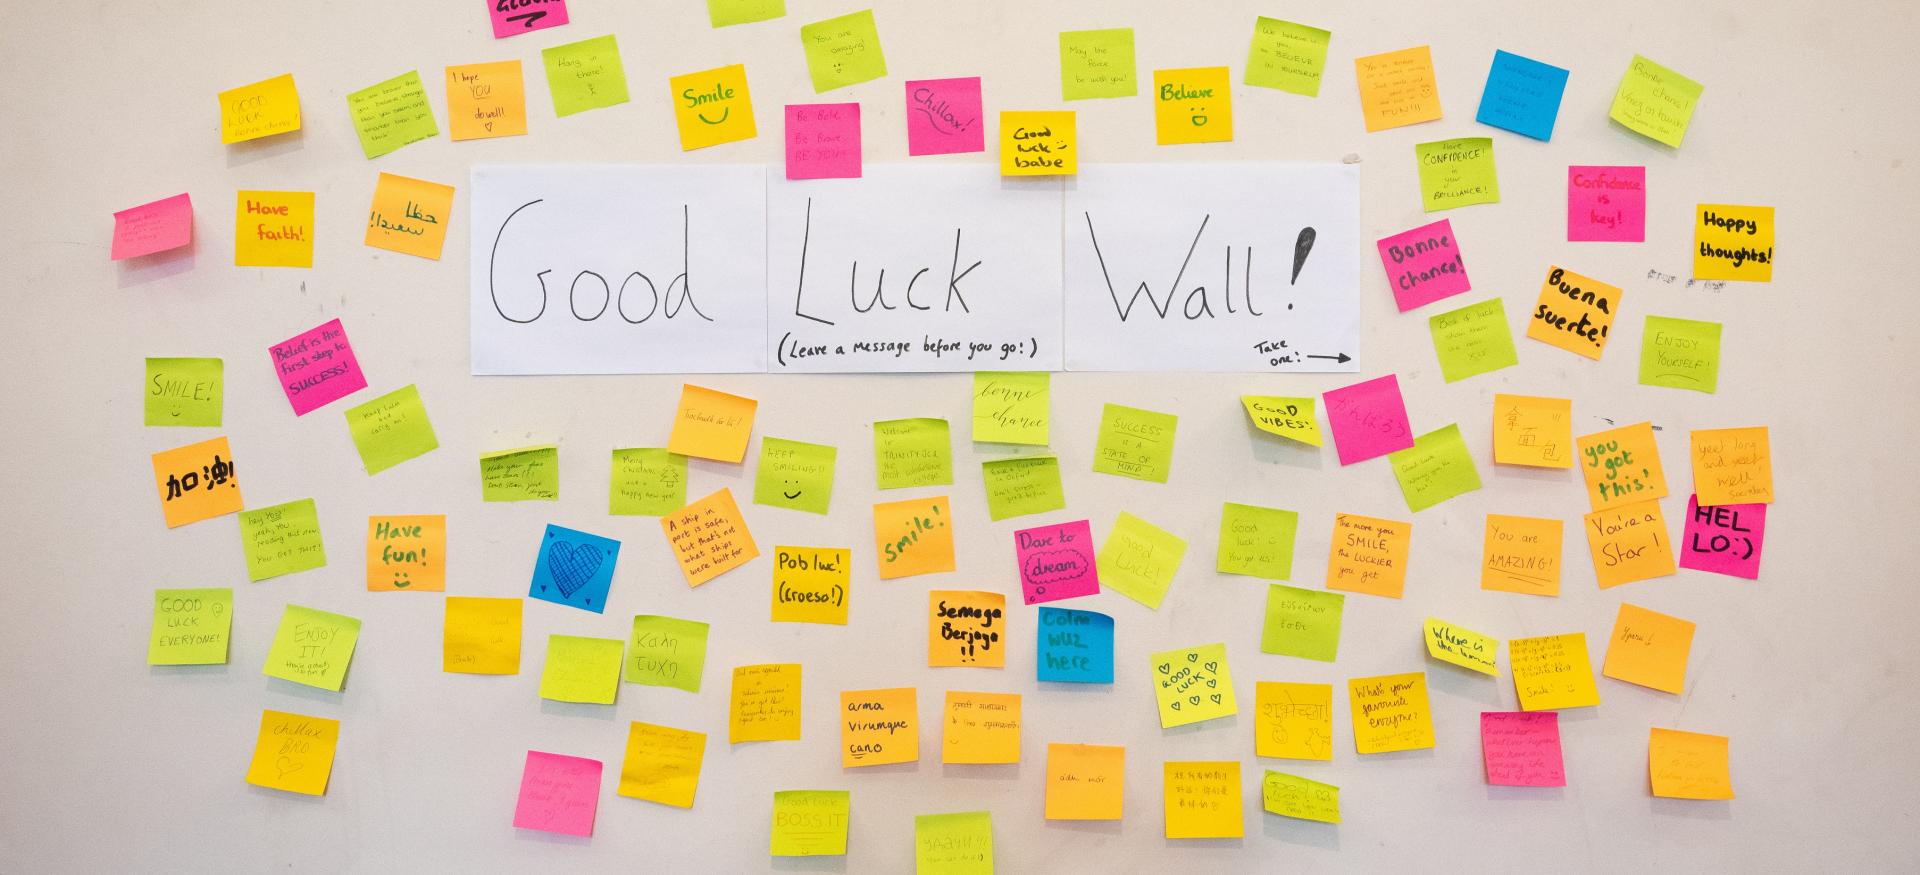 A wall with coloured sticky notes showing messages of support and "Good Luck Wall" written in the middle